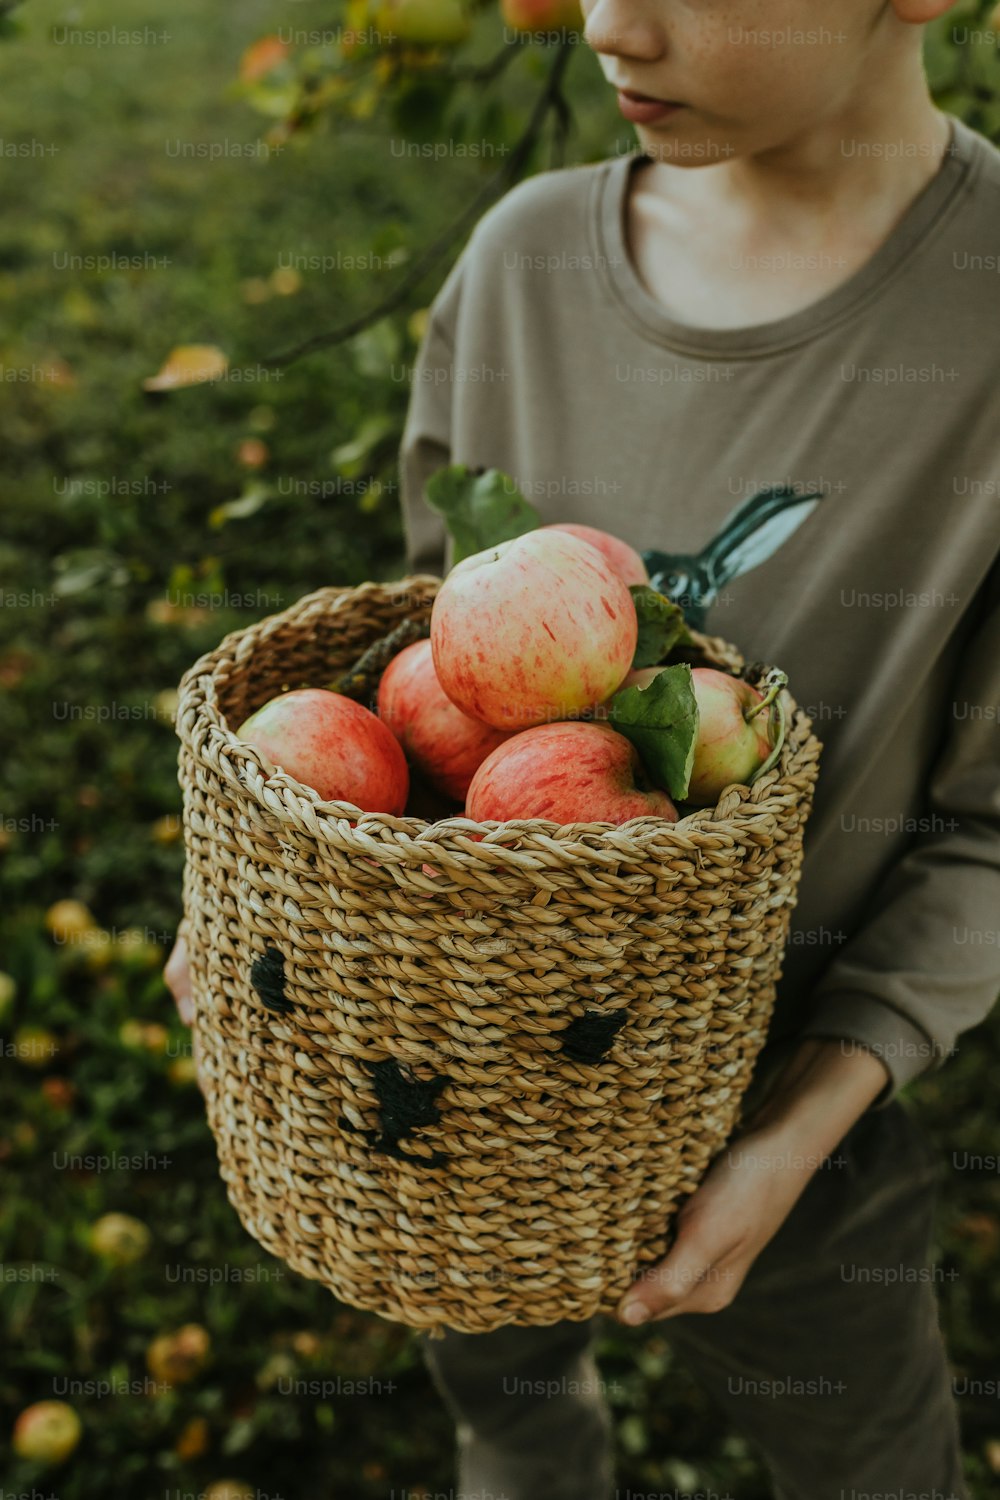 a young boy holding a basket full of apples